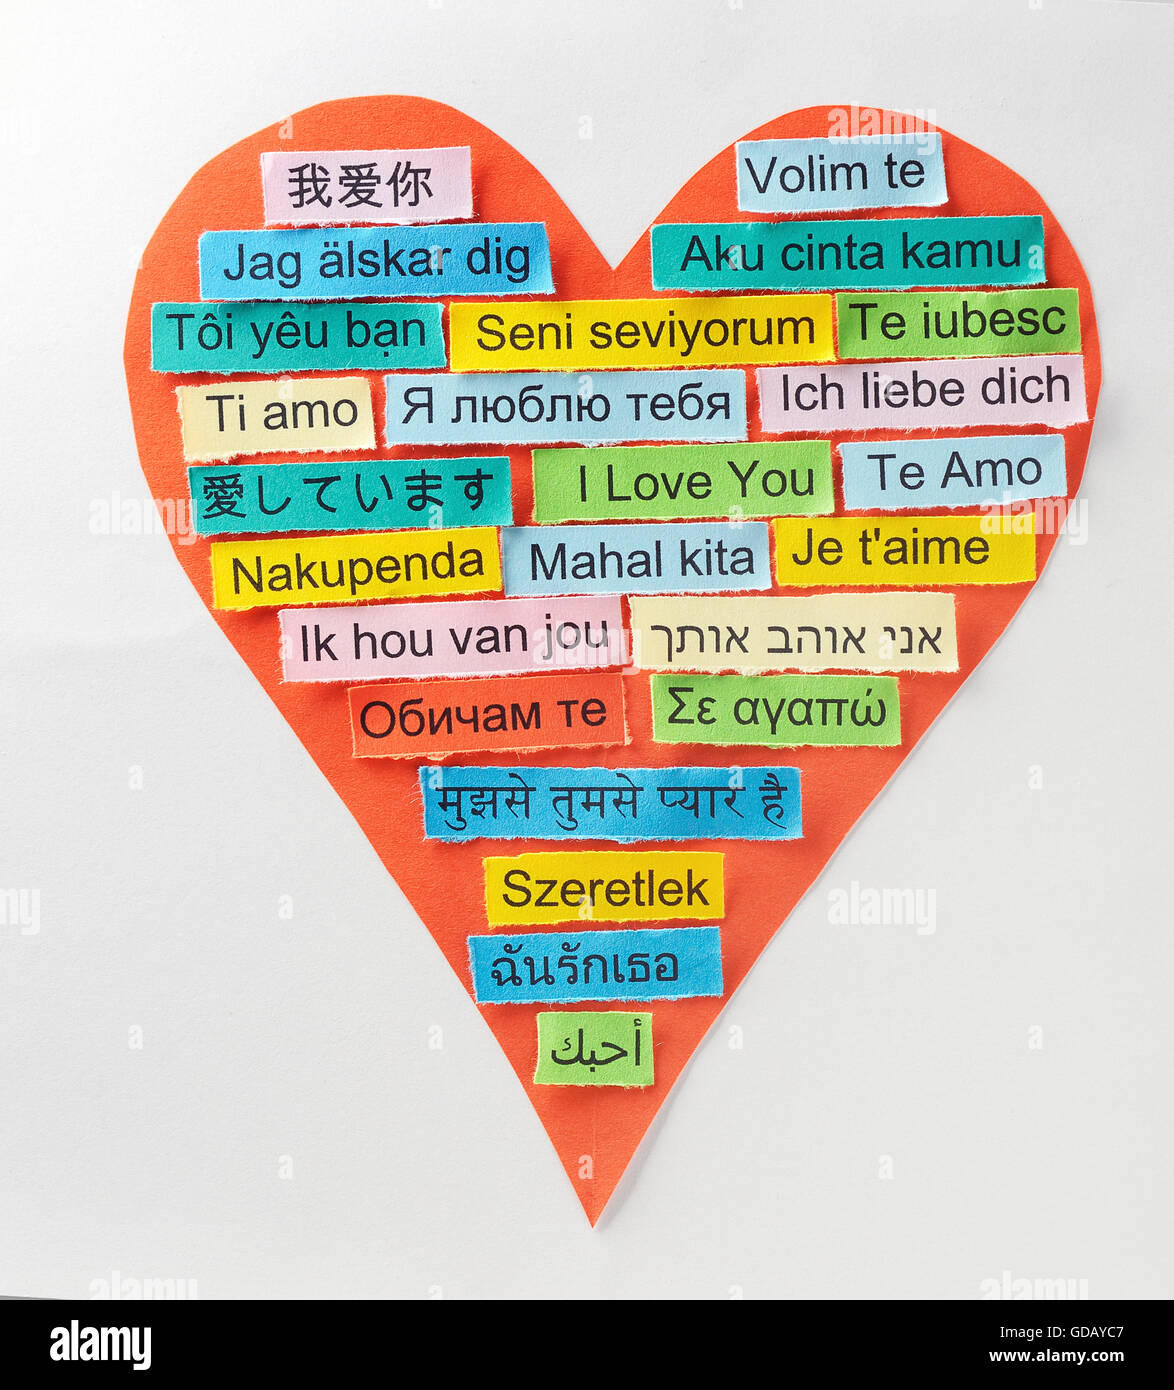 I Love You   Word Cloud printed on colorful paper in different languages on heart shape Stock Photo